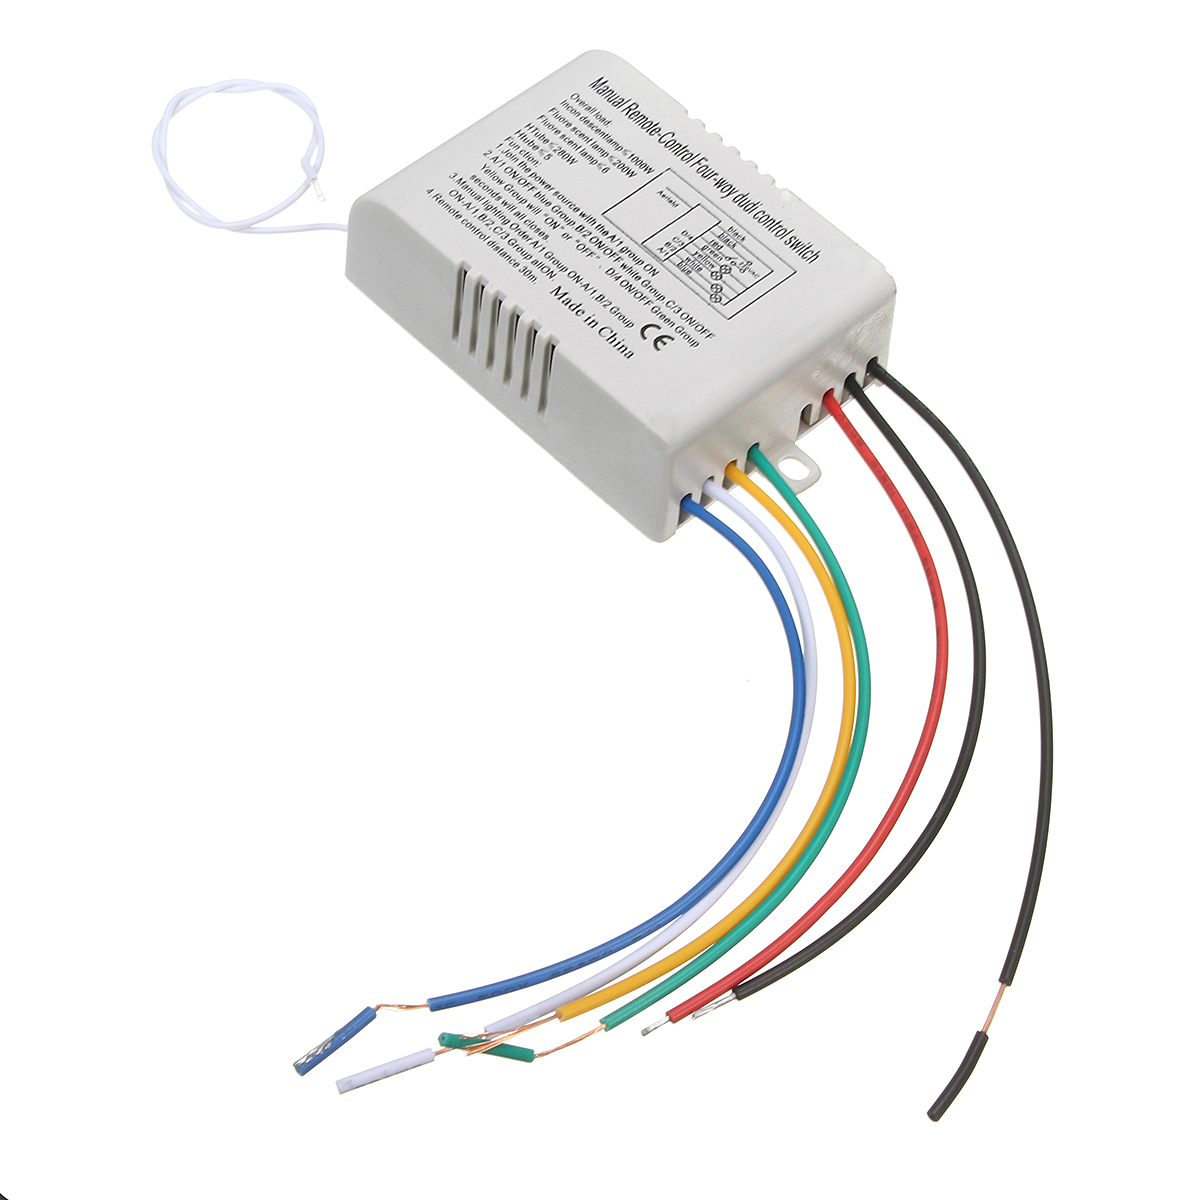 4-Channel-Wireless-Wall-Lamp-Switch-Splitter-Remote-Control-Receiver-Transmitter-1160207-2